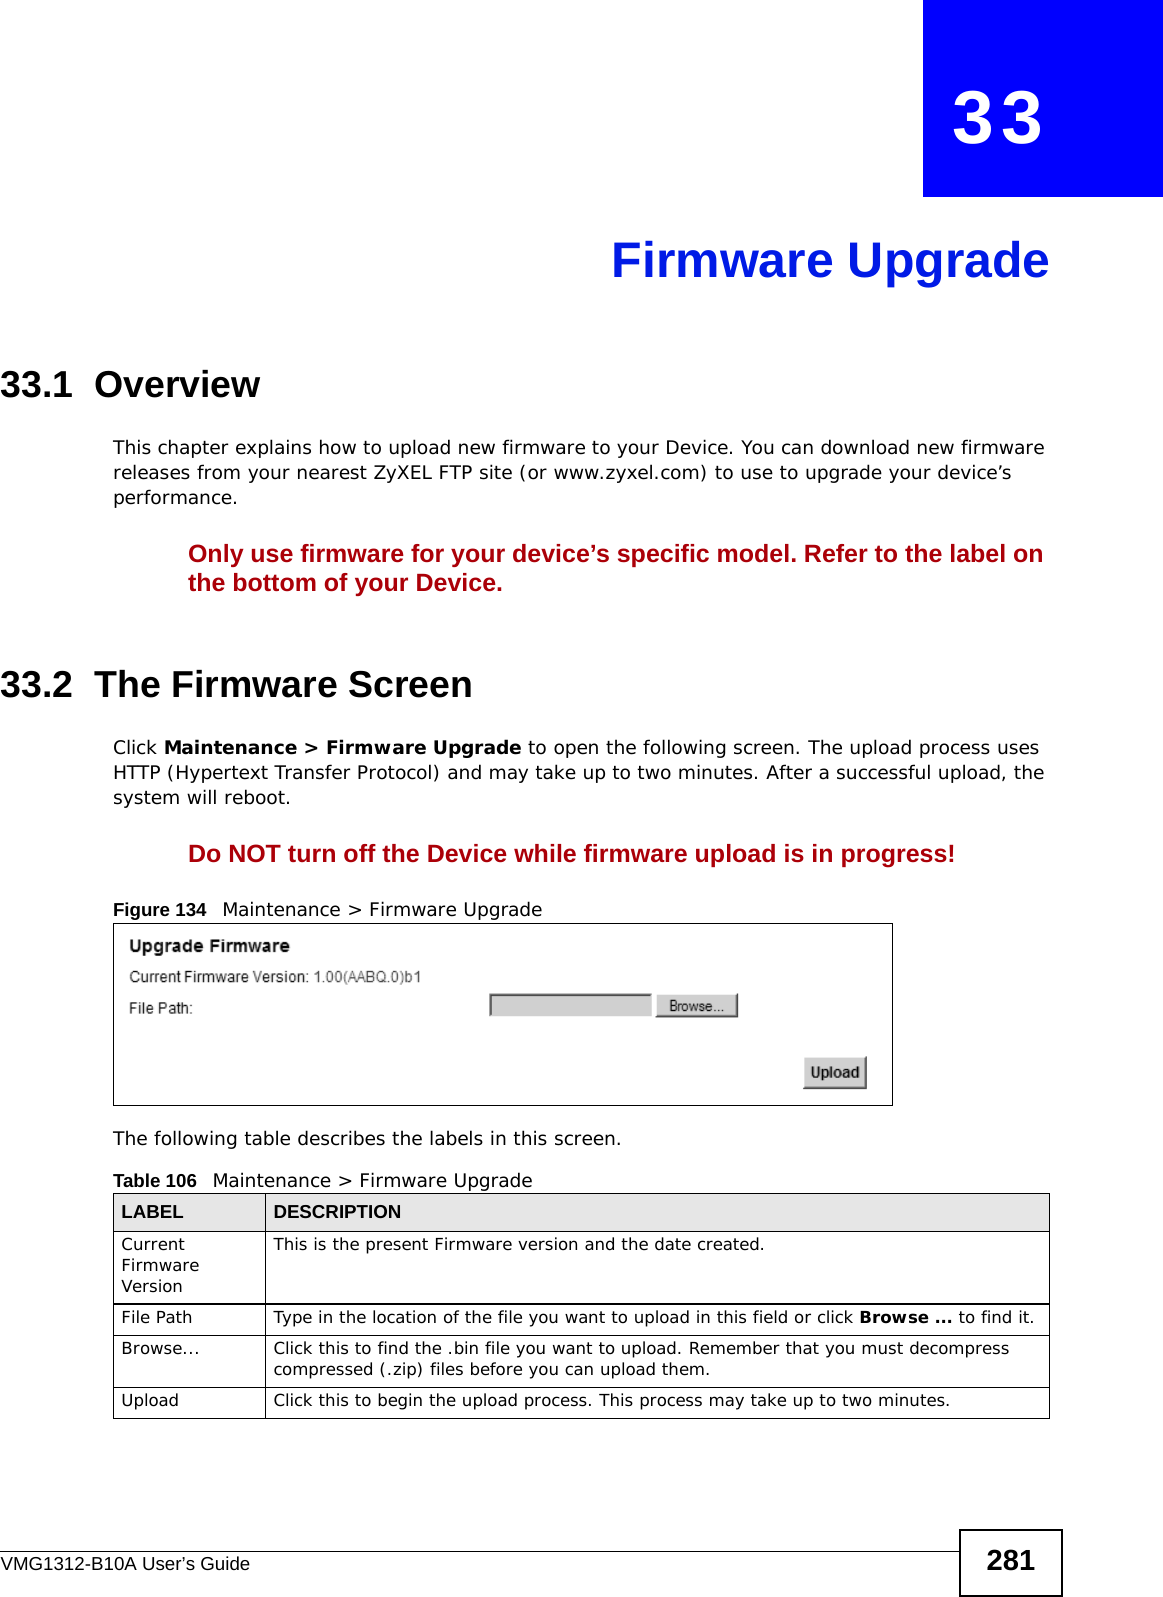 VMG1312-B10A User’s Guide 281CHAPTER   33Firmware Upgrade33.1  OverviewThis chapter explains how to upload new firmware to your Device. You can download new firmware releases from your nearest ZyXEL FTP site (or www.zyxel.com) to use to upgrade your device’s performance.Only use firmware for your device’s specific model. Refer to the label on the bottom of your Device.33.2  The Firmware ScreenClick Maintenance &gt; Firmware Upgrade to open the following screen. The upload process uses HTTP (Hypertext Transfer Protocol) and may take up to two minutes. After a successful upload, the system will reboot. Do NOT turn off the Device while firmware upload is in progress!Figure 134   Maintenance &gt; Firmware UpgradeThe following table describes the labels in this screen. Table 106   Maintenance &gt; Firmware UpgradeLABEL DESCRIPTIONCurrent Firmware VersionThis is the present Firmware version and the date created. File Path Type in the location of the file you want to upload in this field or click Browse ... to find it.Browse...  Click this to find the .bin file you want to upload. Remember that you must decompress compressed (.zip) files before you can upload them. Upload  Click this to begin the upload process. This process may take up to two minutes.